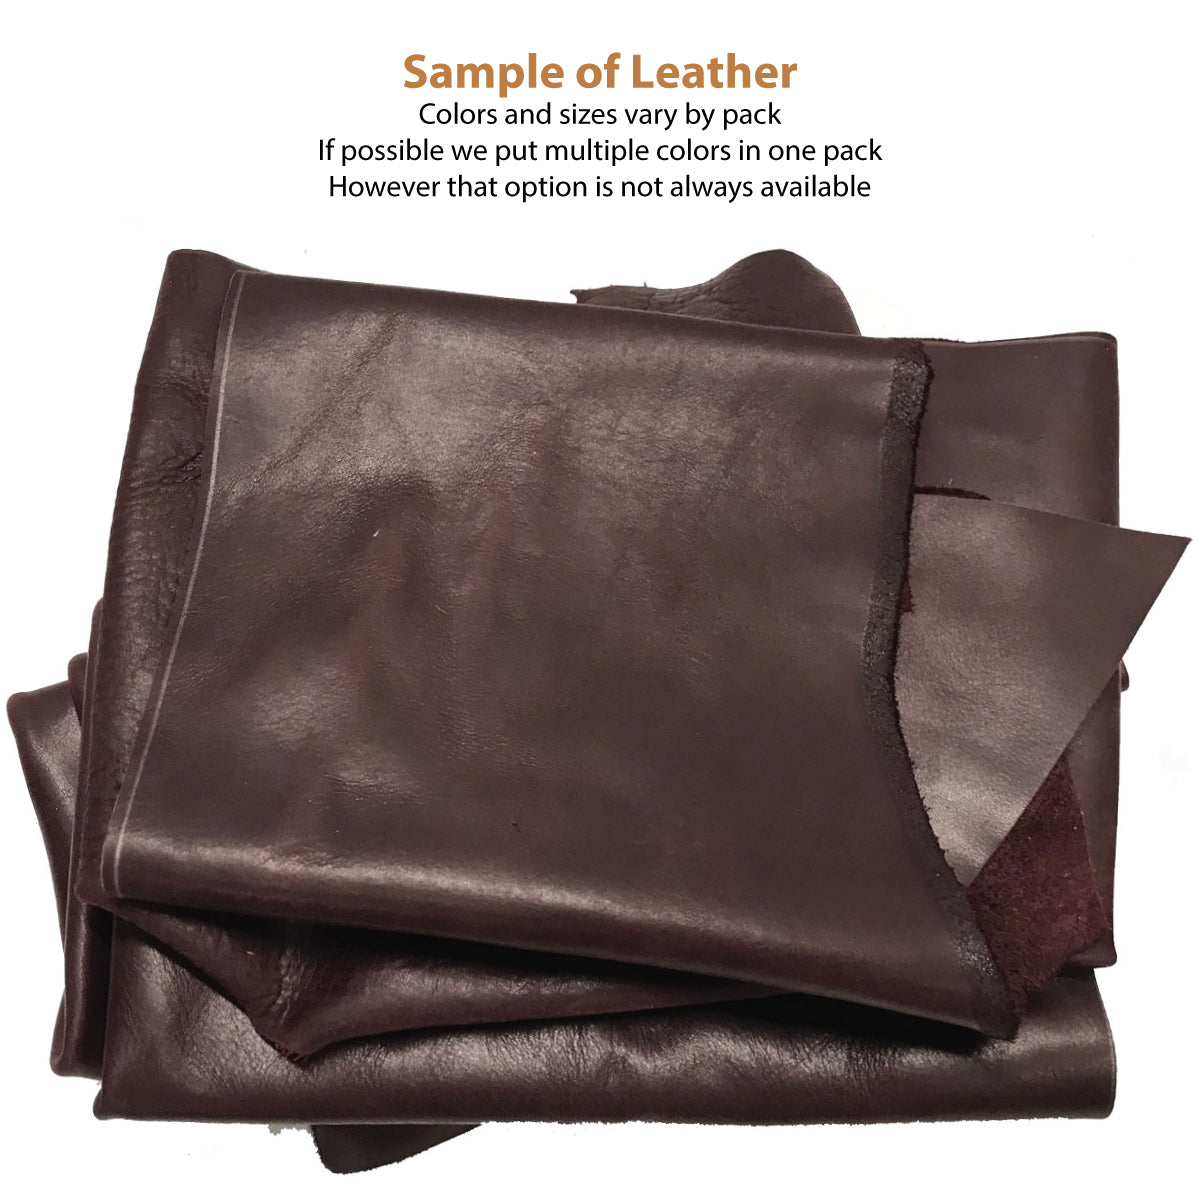 5 lbs Leather pieces: 8-15 pieces per bag